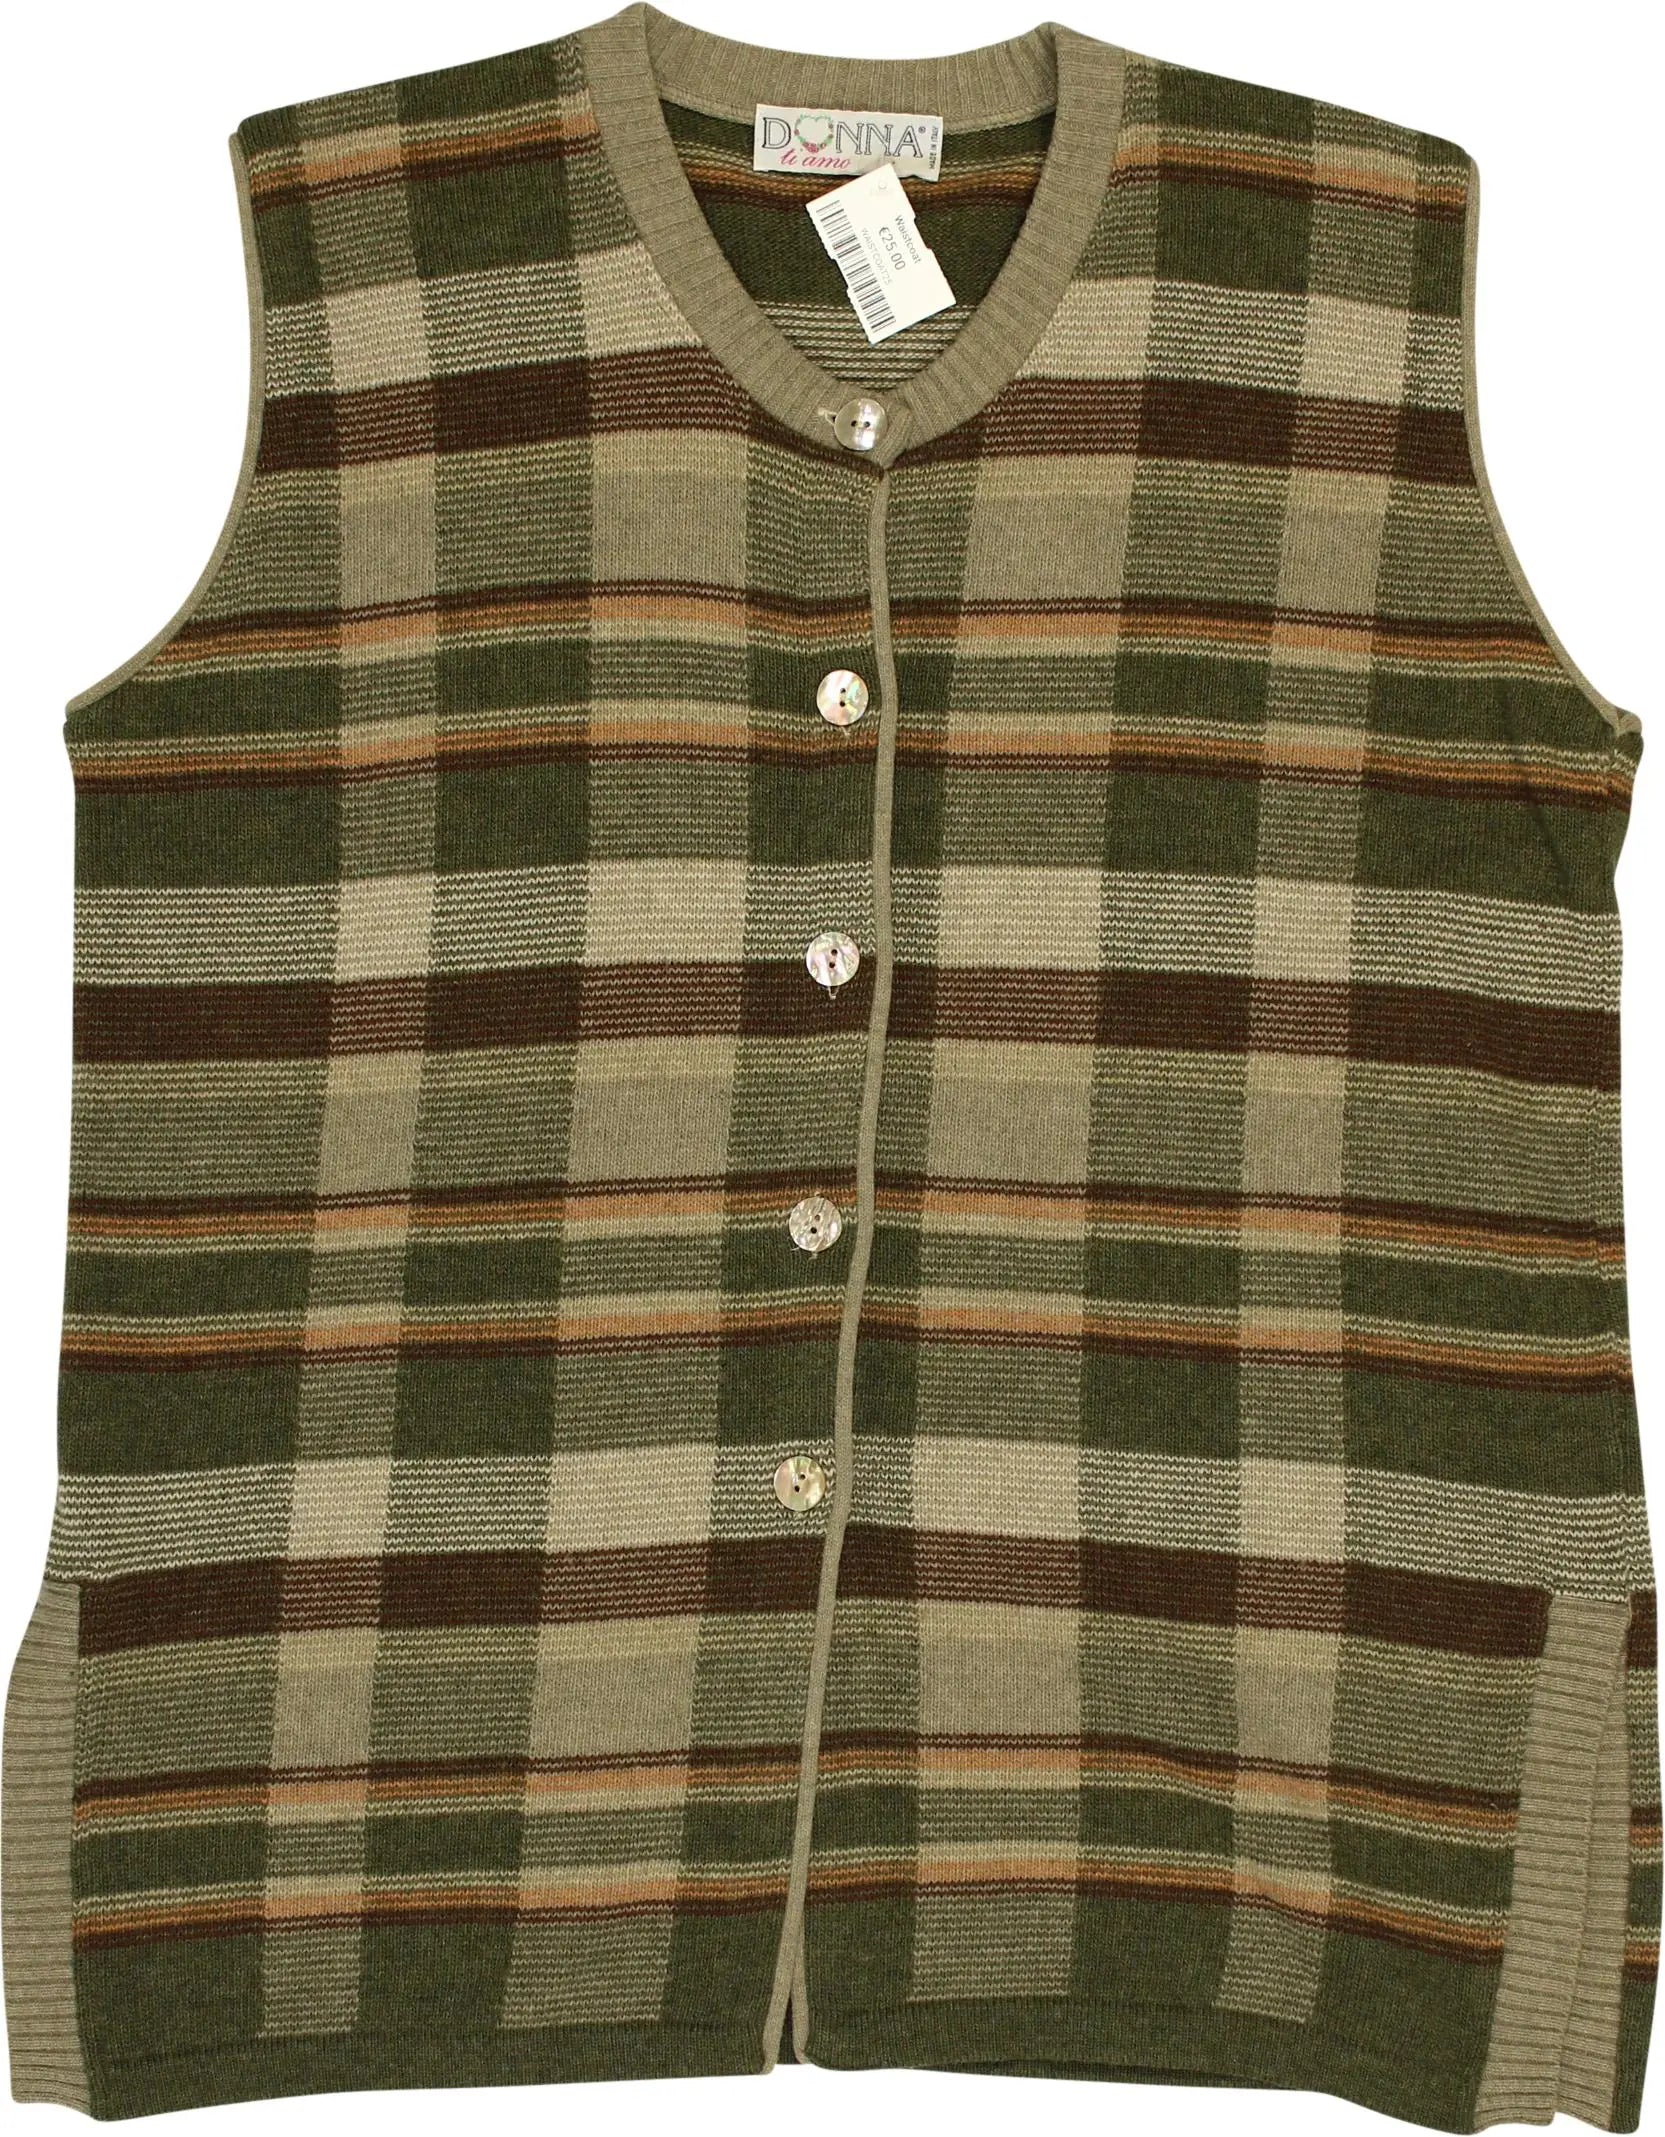 Donna - Vintage Waistcoat- ThriftTale.com - Vintage and second handclothing